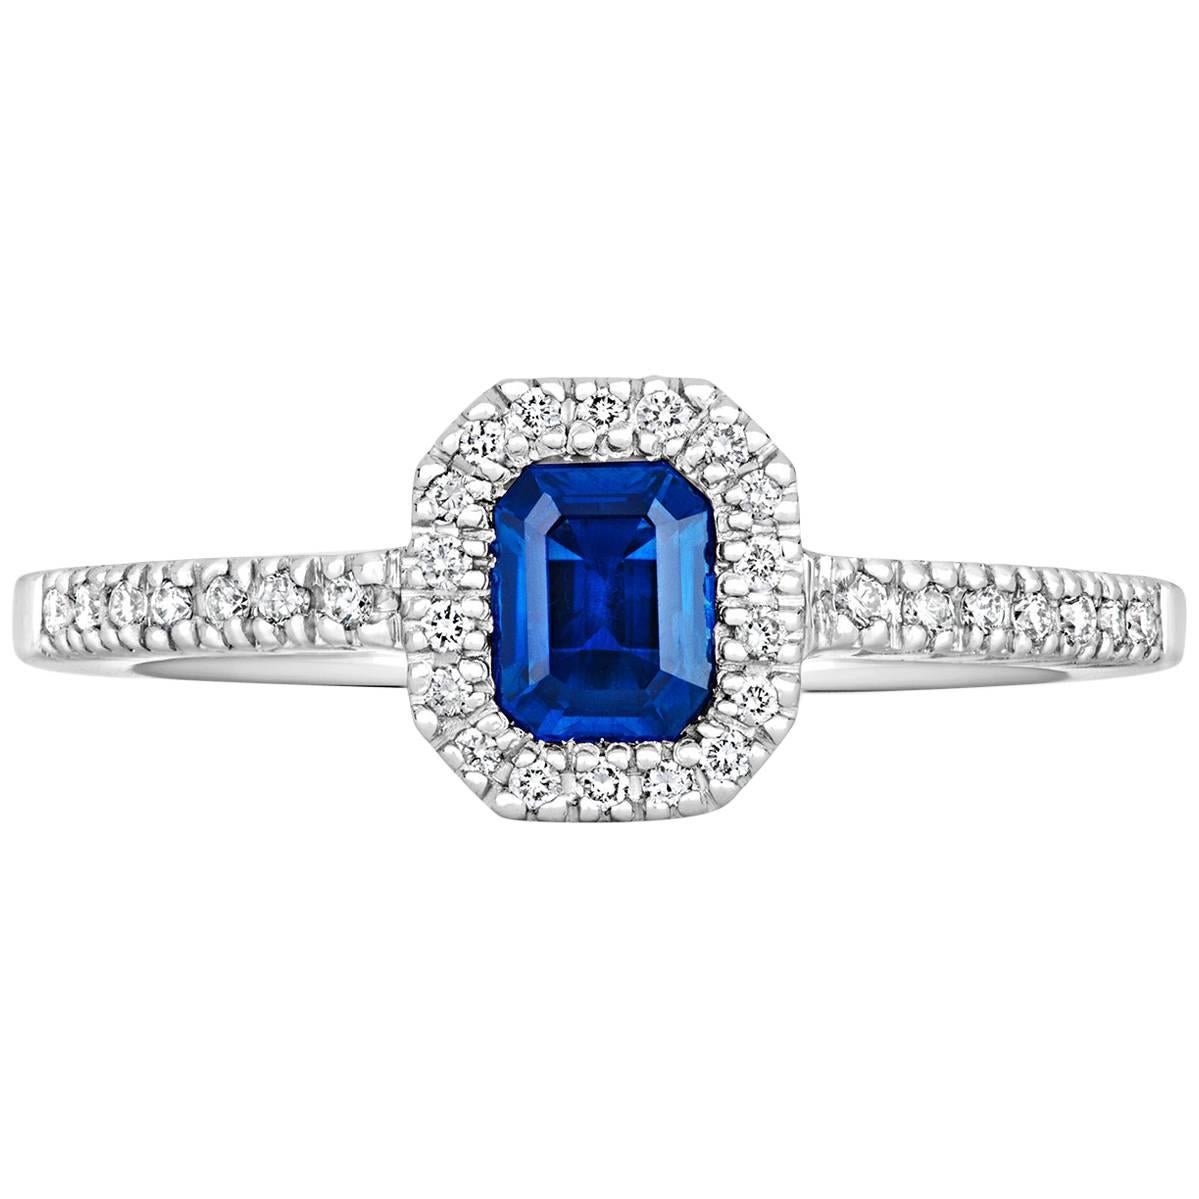 Tivon 18ct White Gold Pave set white Diamond and Emerald cut Blue Sapphire Ring For Sale